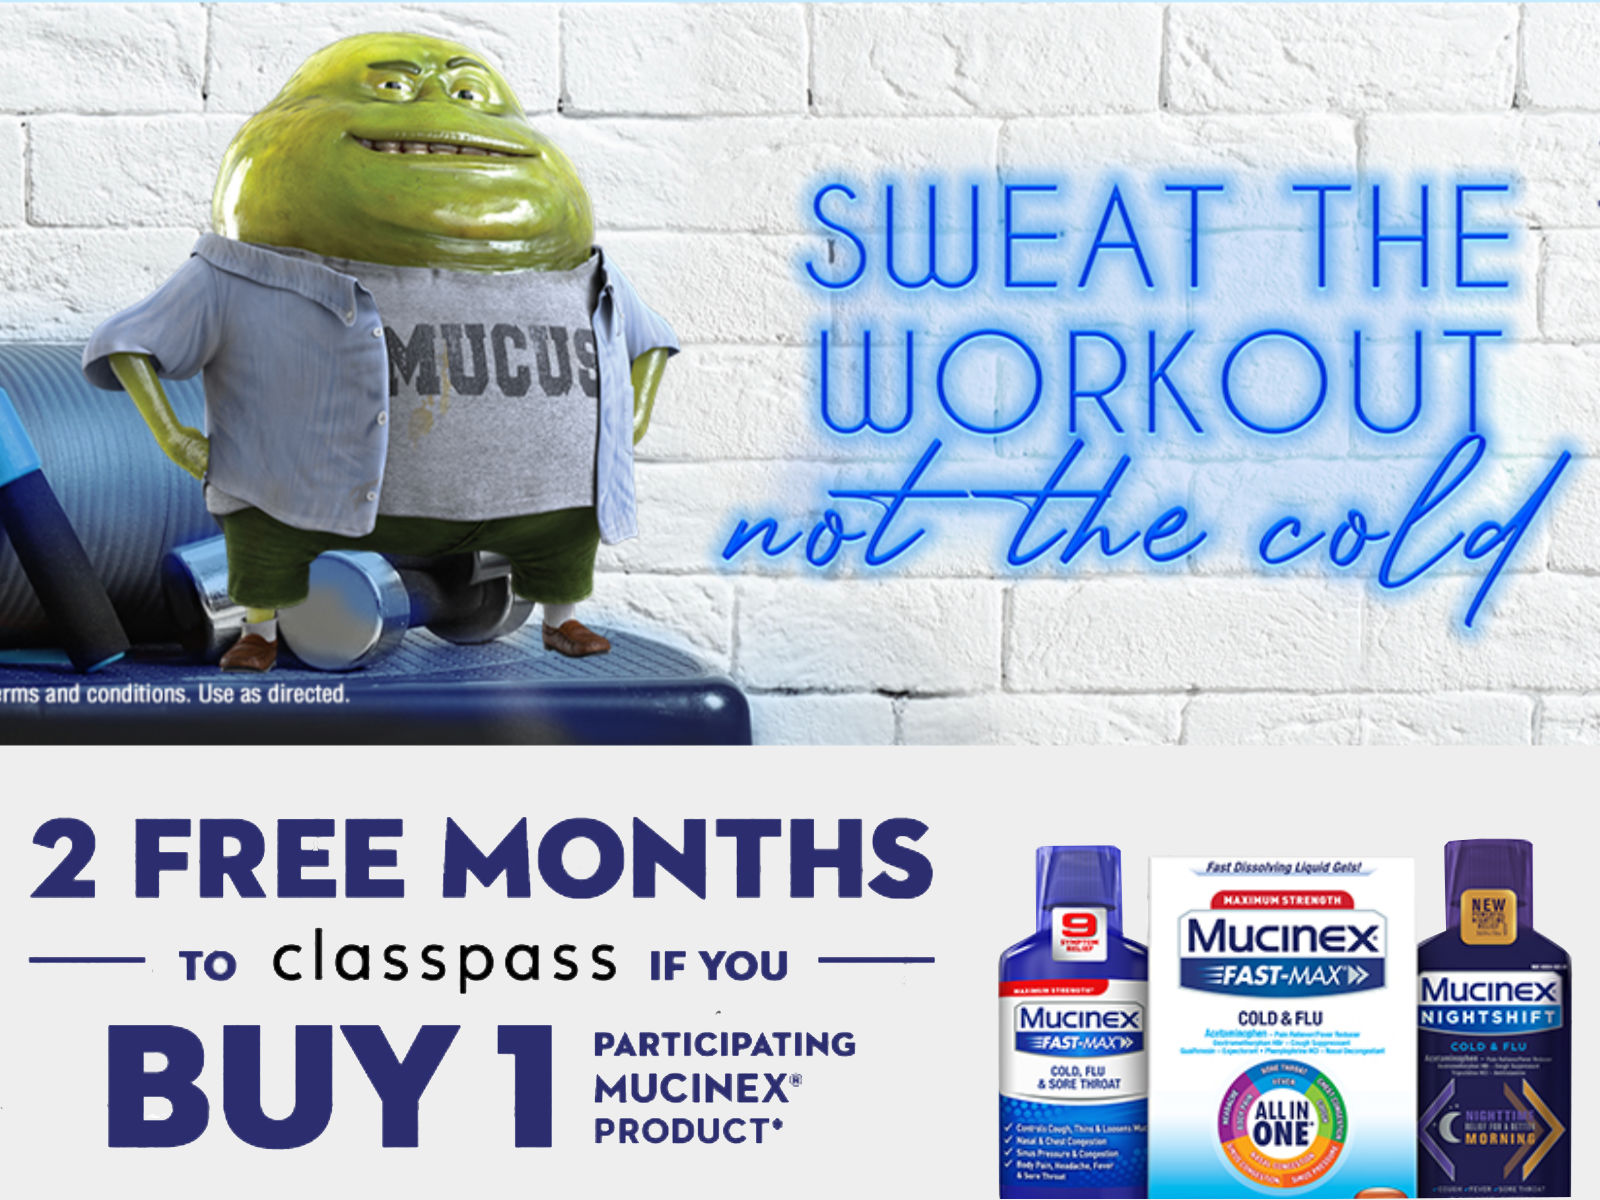 Sweat the Workout Not The Cold – Get A Free ClassPass Subscription With Your Mucinex Purchase